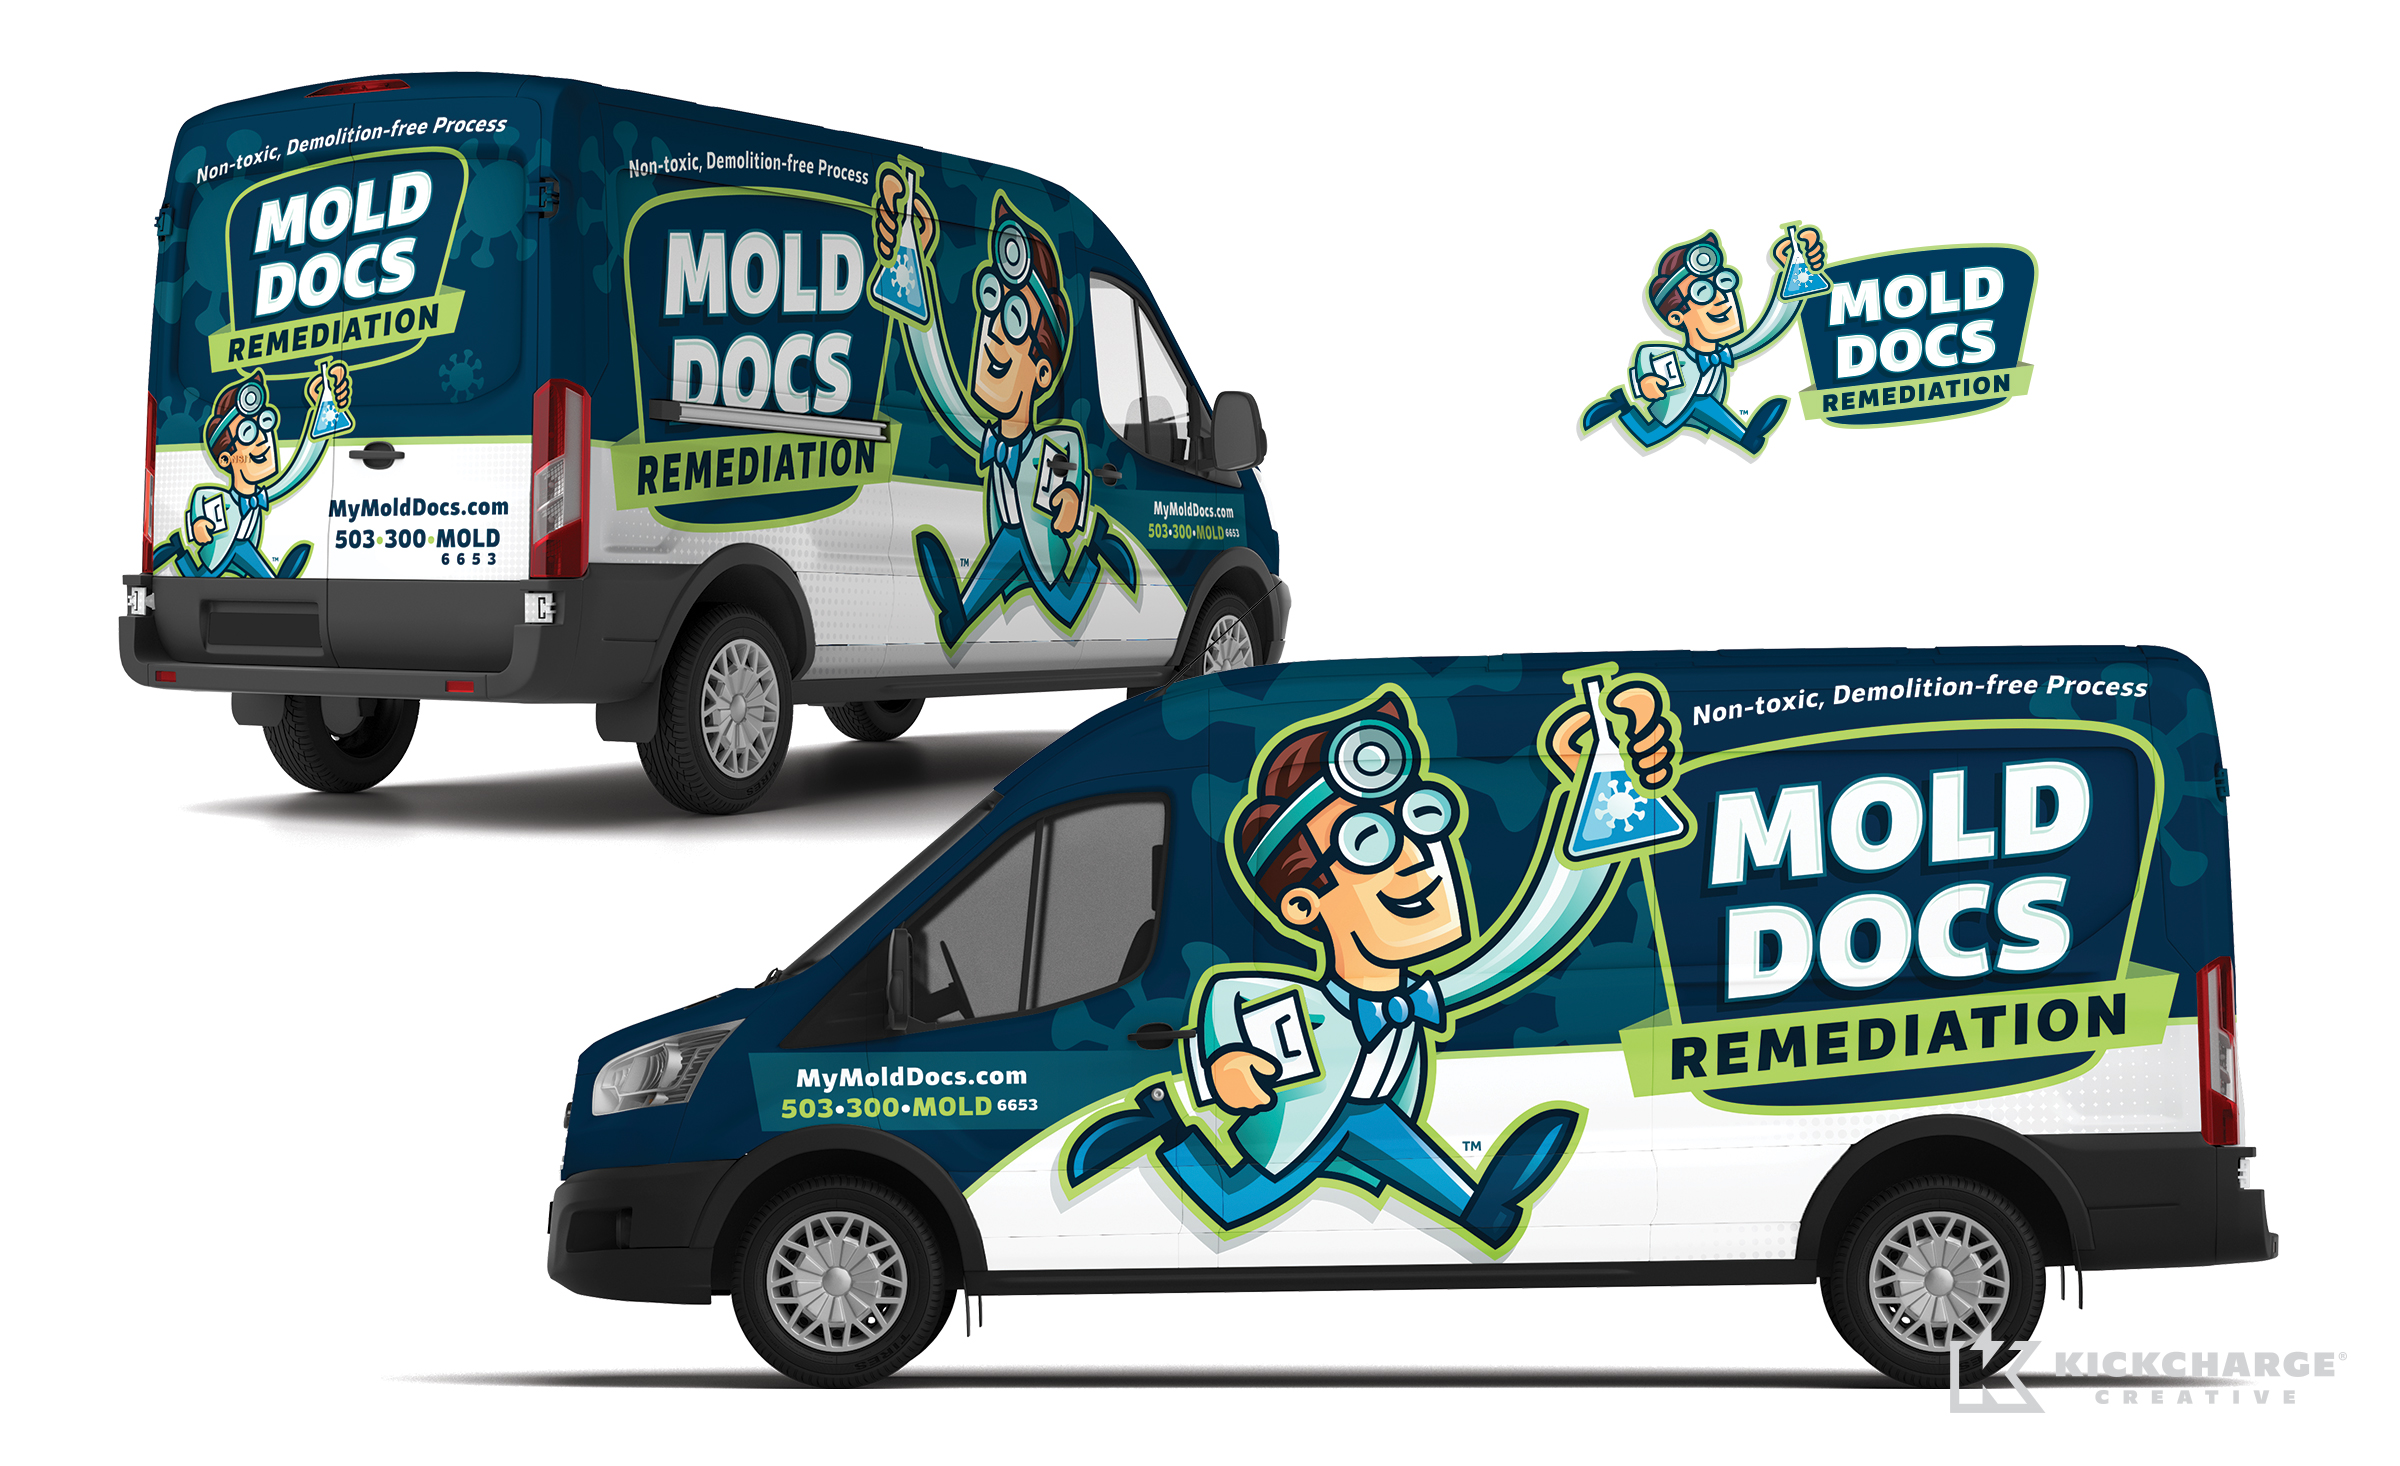 truck wrap for Mold Docs Remediation